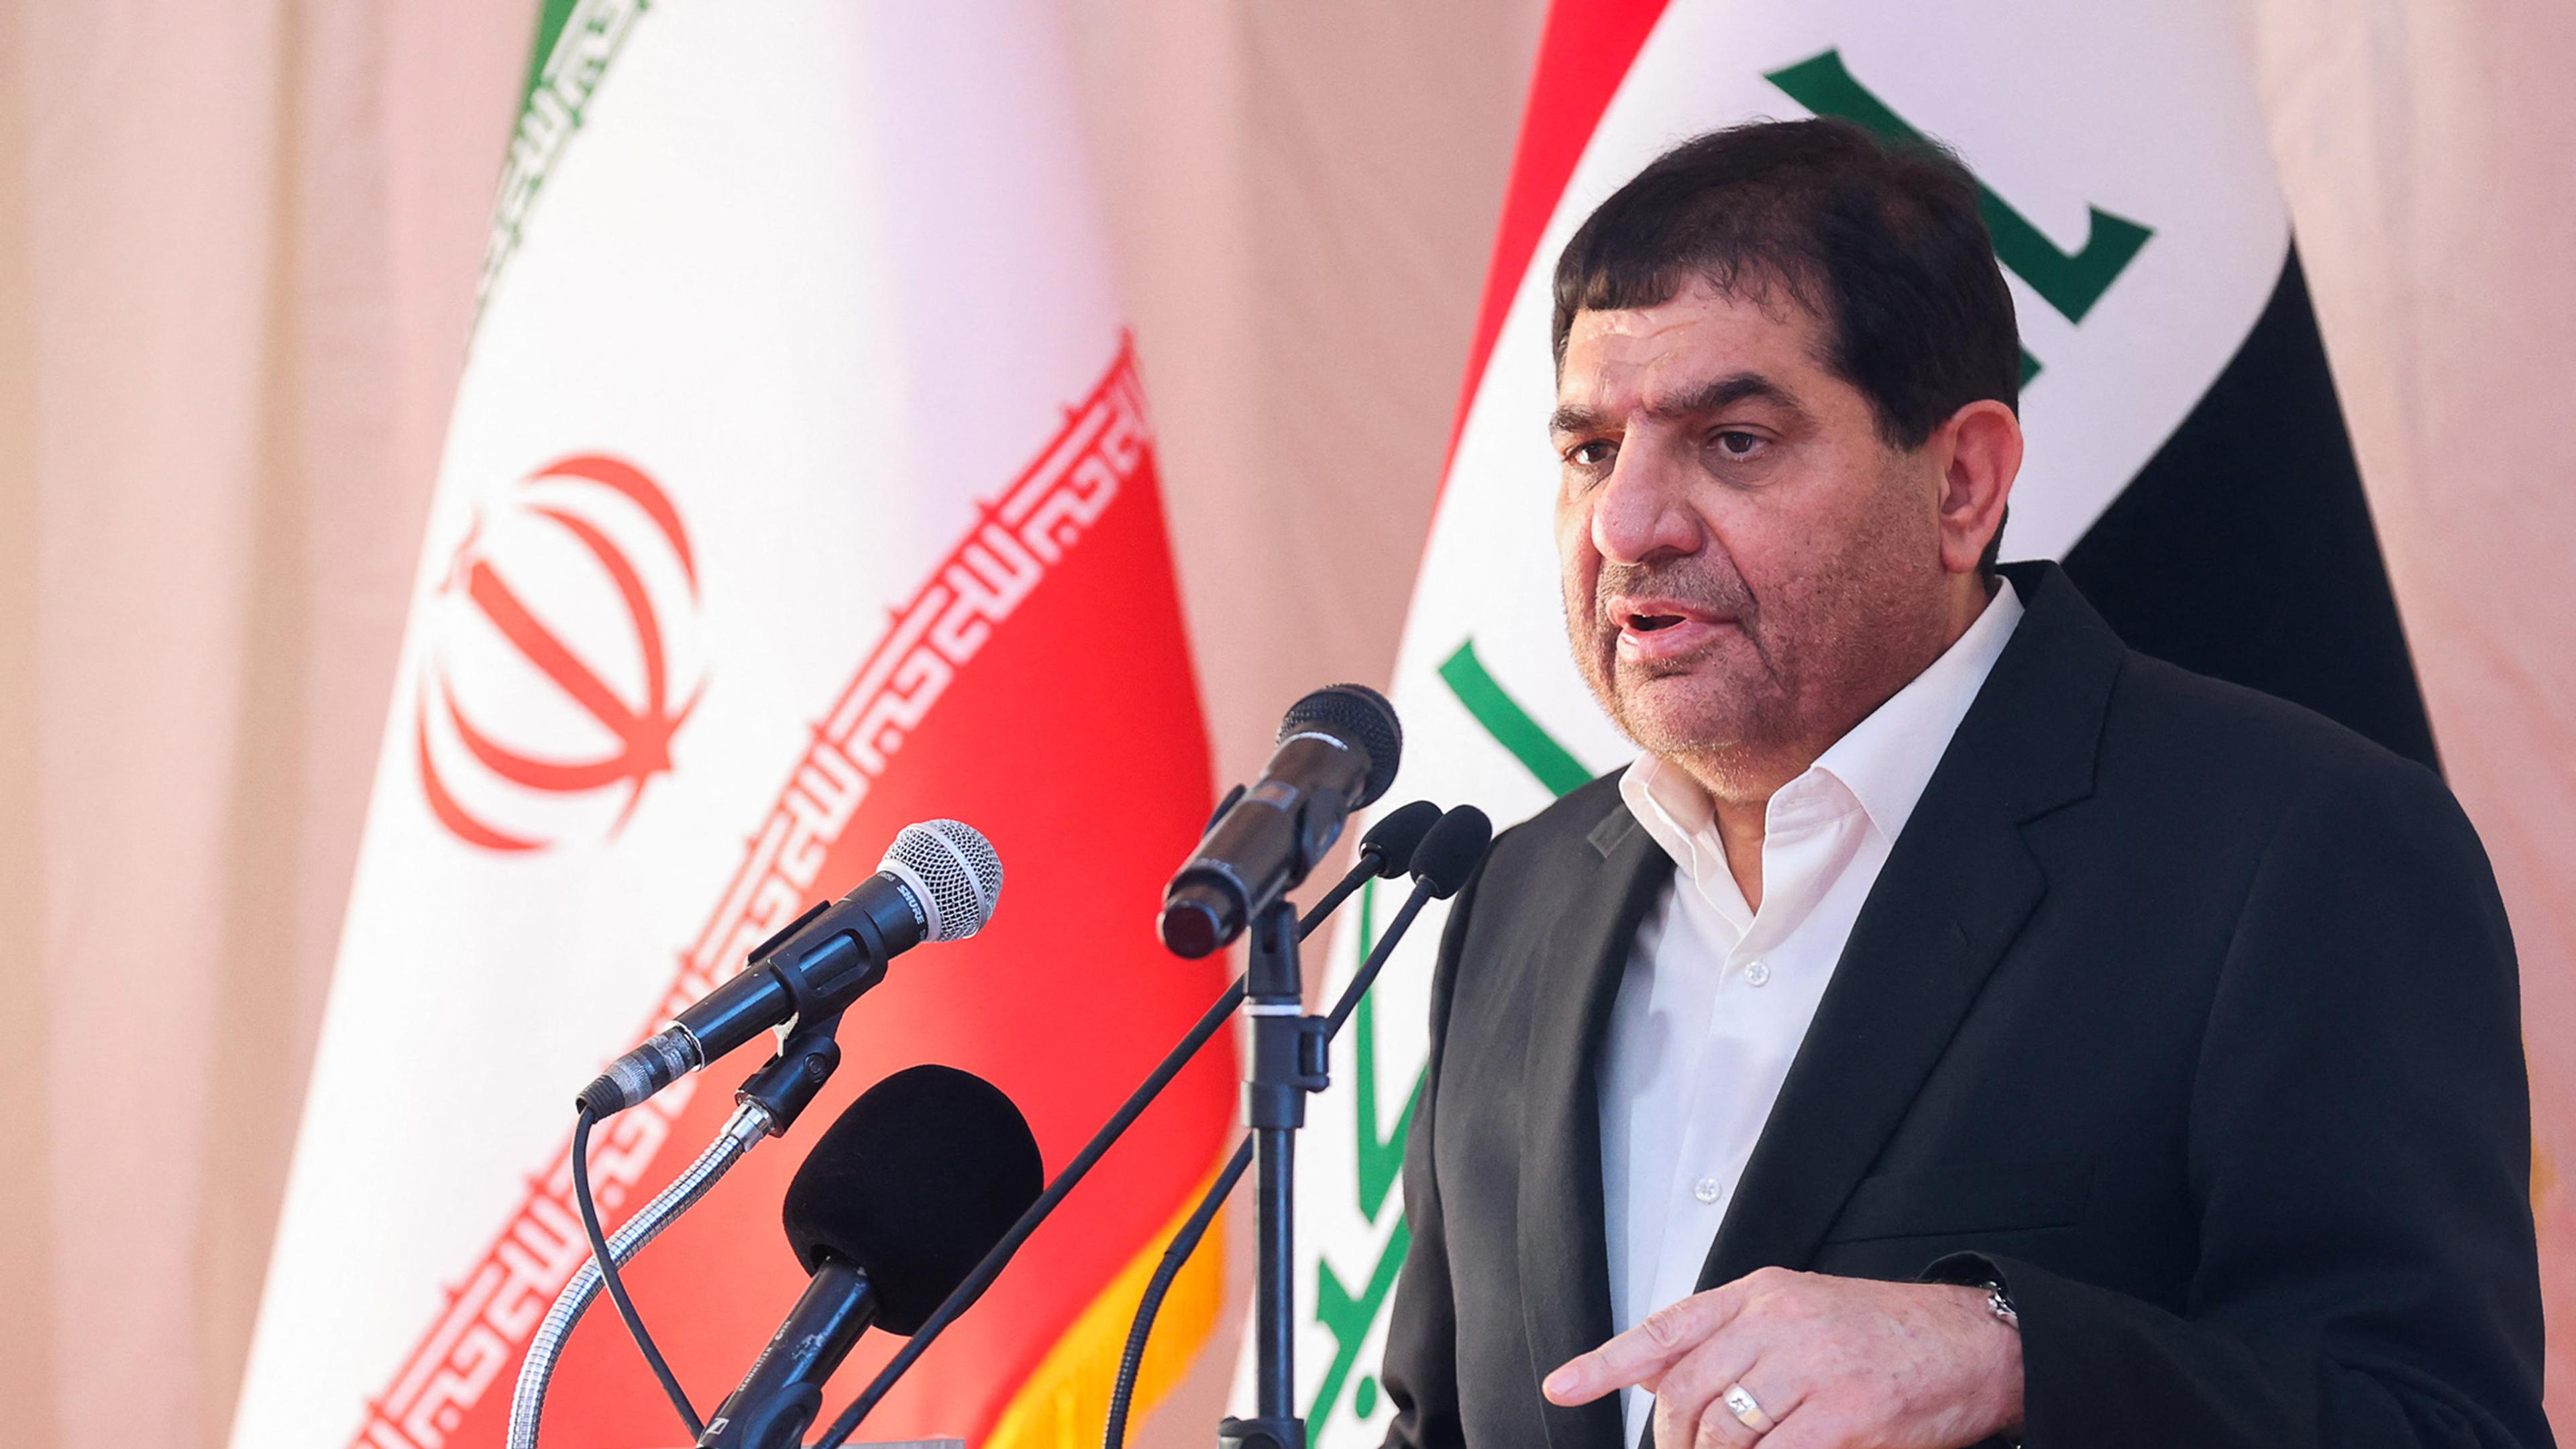 (FILES) A handout picture provided by the Iranian Vice President's Media Office shows Vice President Mohammad Mokhber speaking at the ceremony to lay the foundation stone for the railway connection project at the Shalamcheh border crossing in Iraq's southern province of Basra Governorate on September 2, 2023. Iran's first vice president, Mohammad Mokhber, is expected assume the presidency after Ebrahim Raisi's death in a helicopter crash on May 19, 2024 as the country gears up for early elections. (Photo by Iranian Vice-Presidency / AFP) / === RESTRICTED TO EDITORIAL USE - MANDATORY CREDIT "AFP PHOTO / HO / IRANIAN VICE PRESIDENCY" - NO MARKETING NO ADVERTISING CAMPAIGNS - DISTRIBUTED AS A SERVICE TO CLIENTS ===